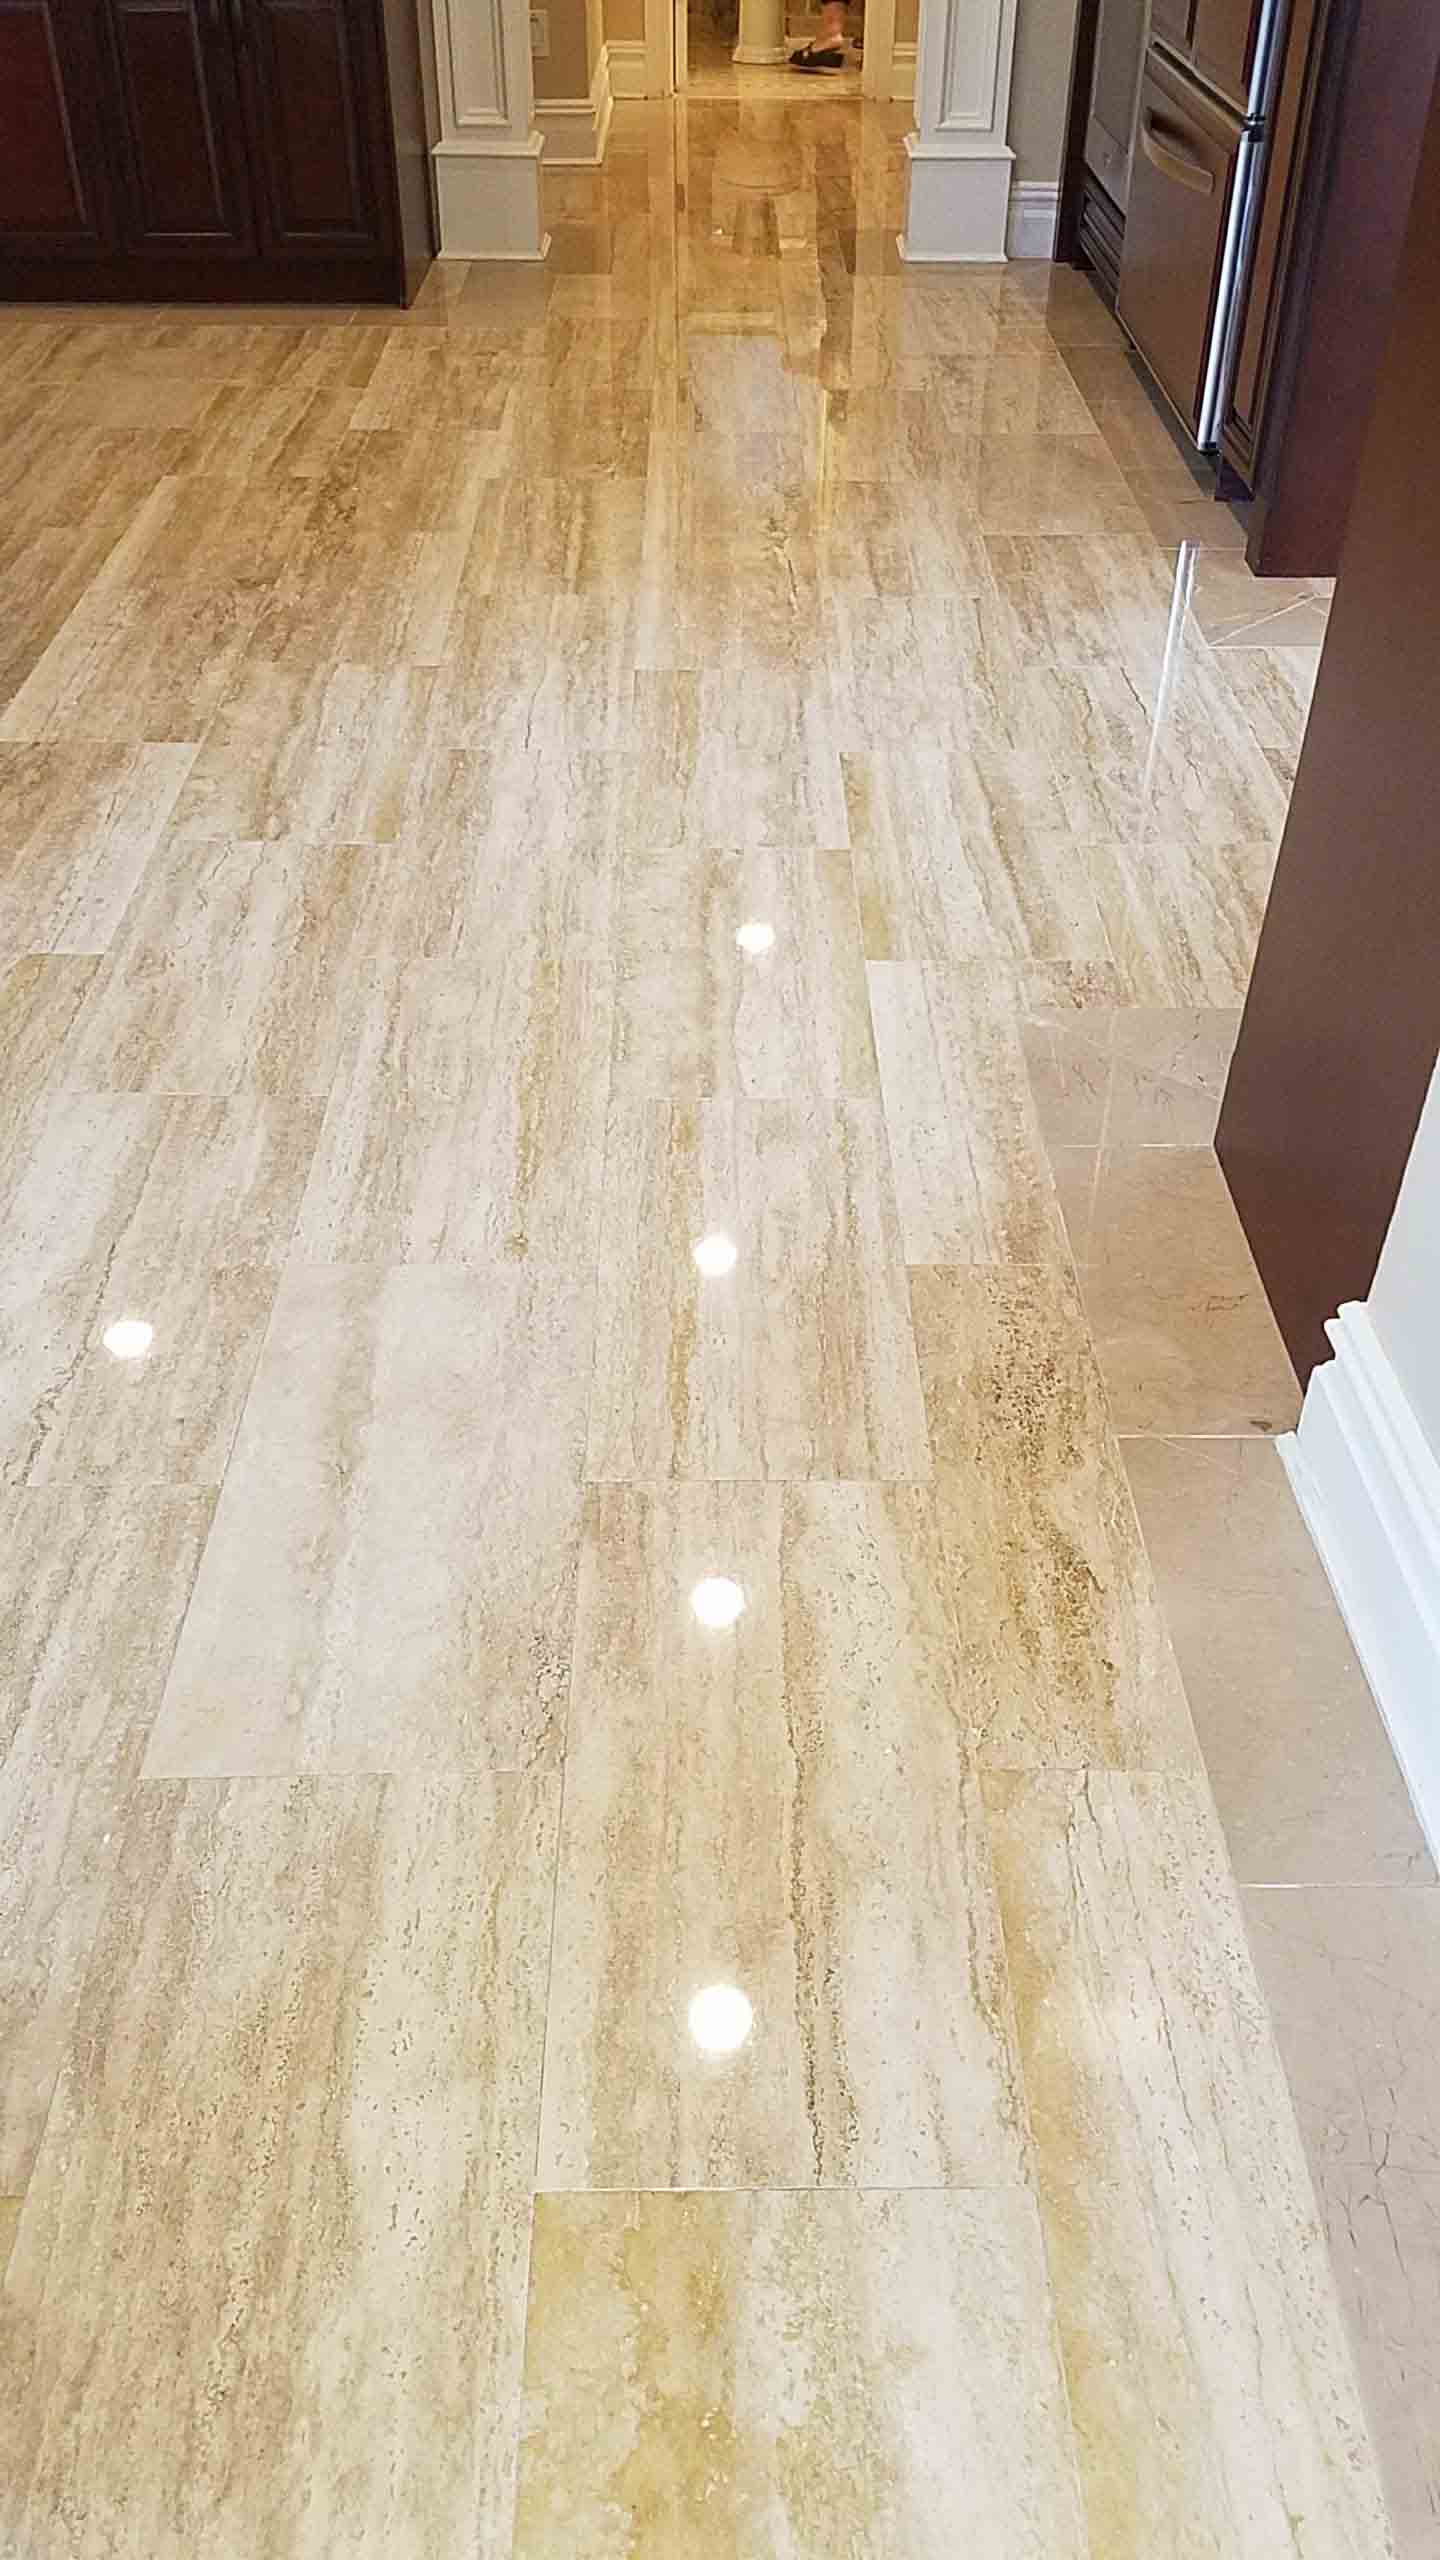 20170816 164412 - Marble Refinishing in New Jersey